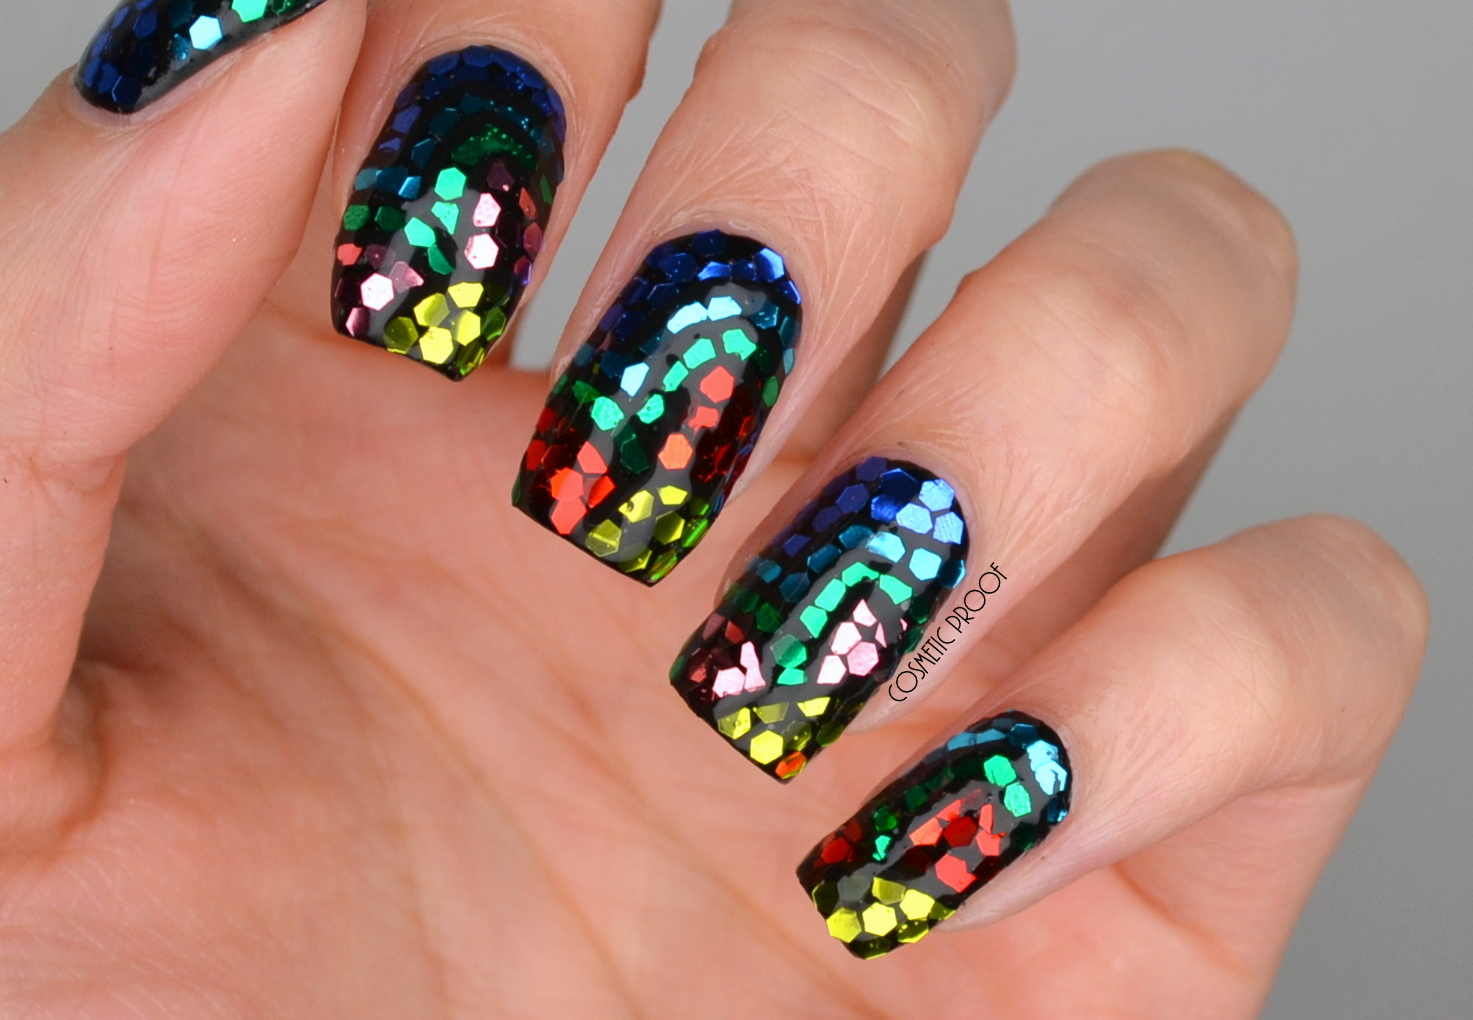 1. How to Create a Stunning Glass Nail Art Effect - wide 3